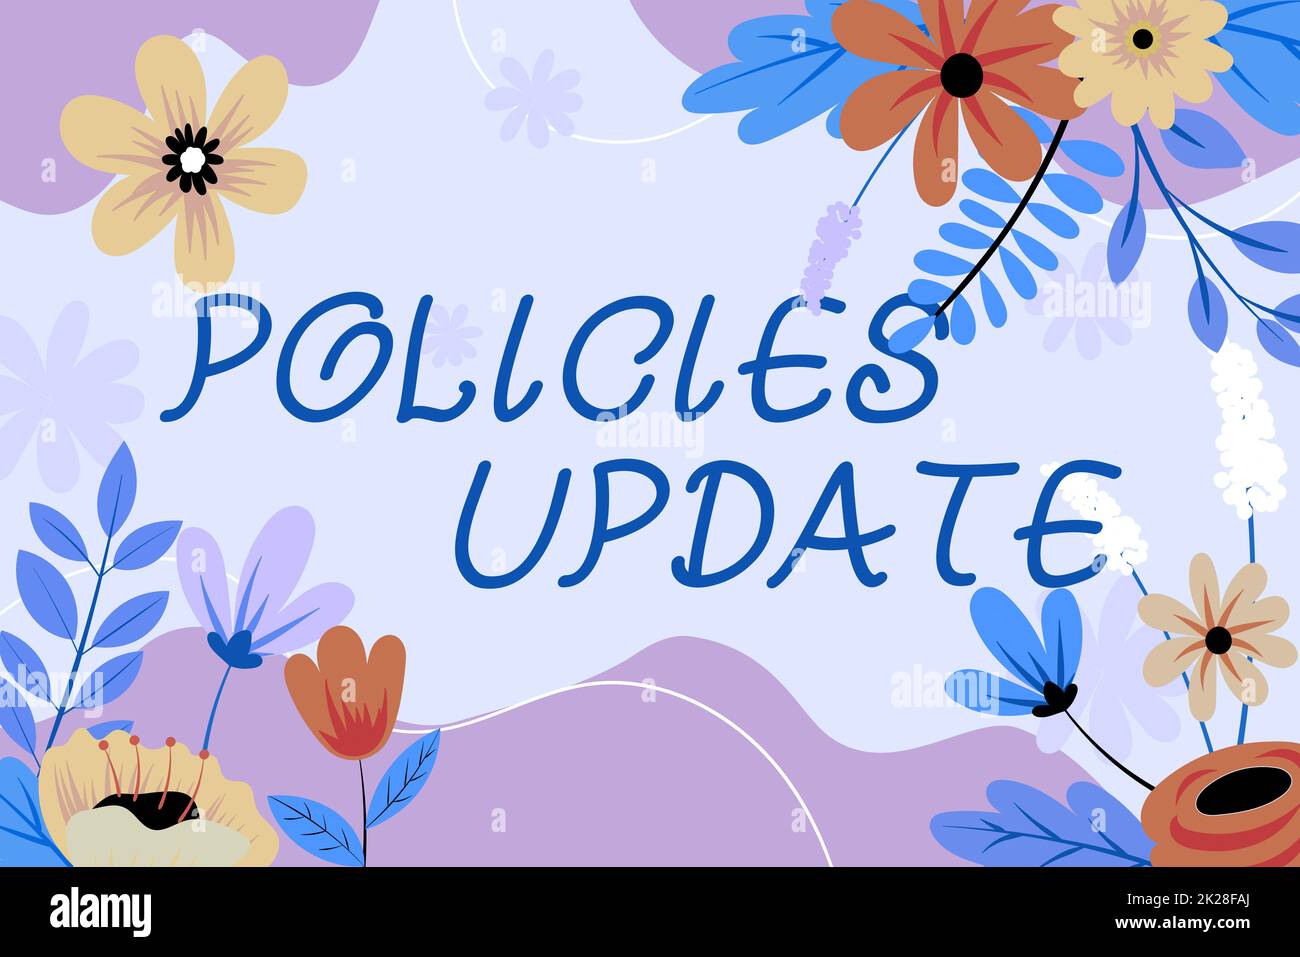 Writing displaying text Policies Update. Business concept act of adding new information or guidelines formulated Blank Frame Decorated With Abstract Modernized Forms Flowers And Foliage. Stock Photo